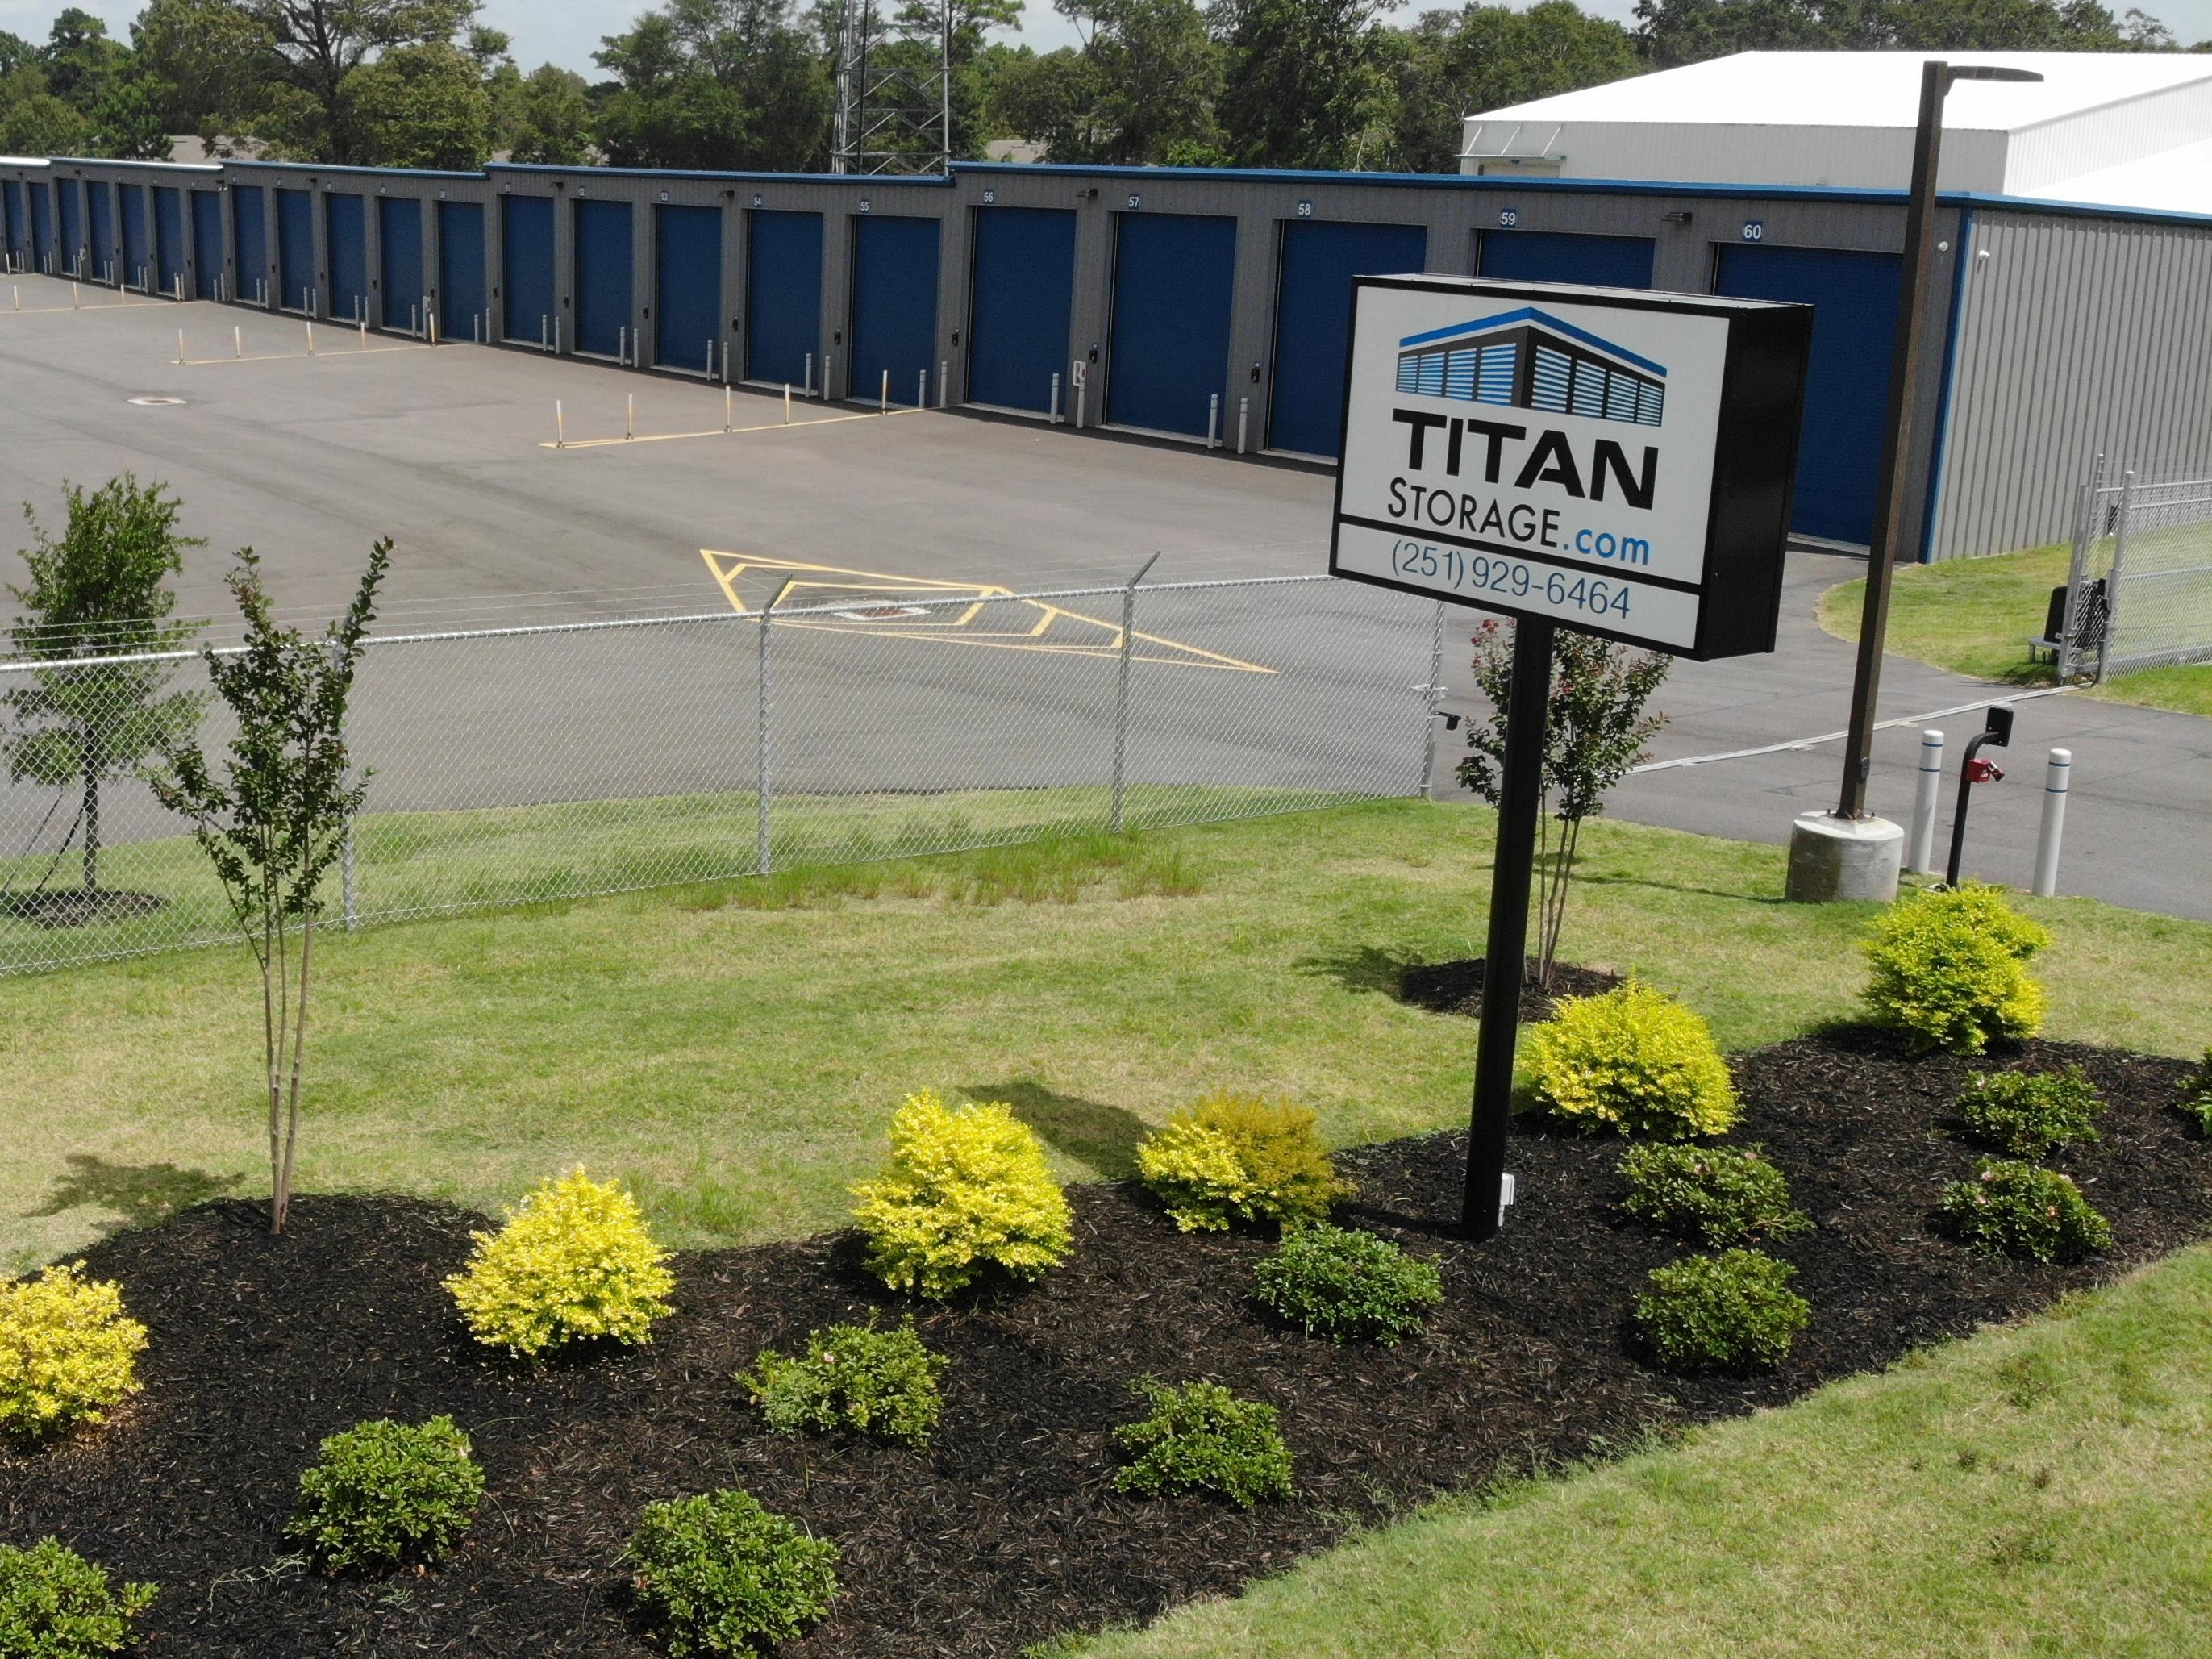 GET IN TOUCH WITH TITAN STORAGE FOR YOUR Daphne, AL BOAT STORAGE UNIT SOLUTION